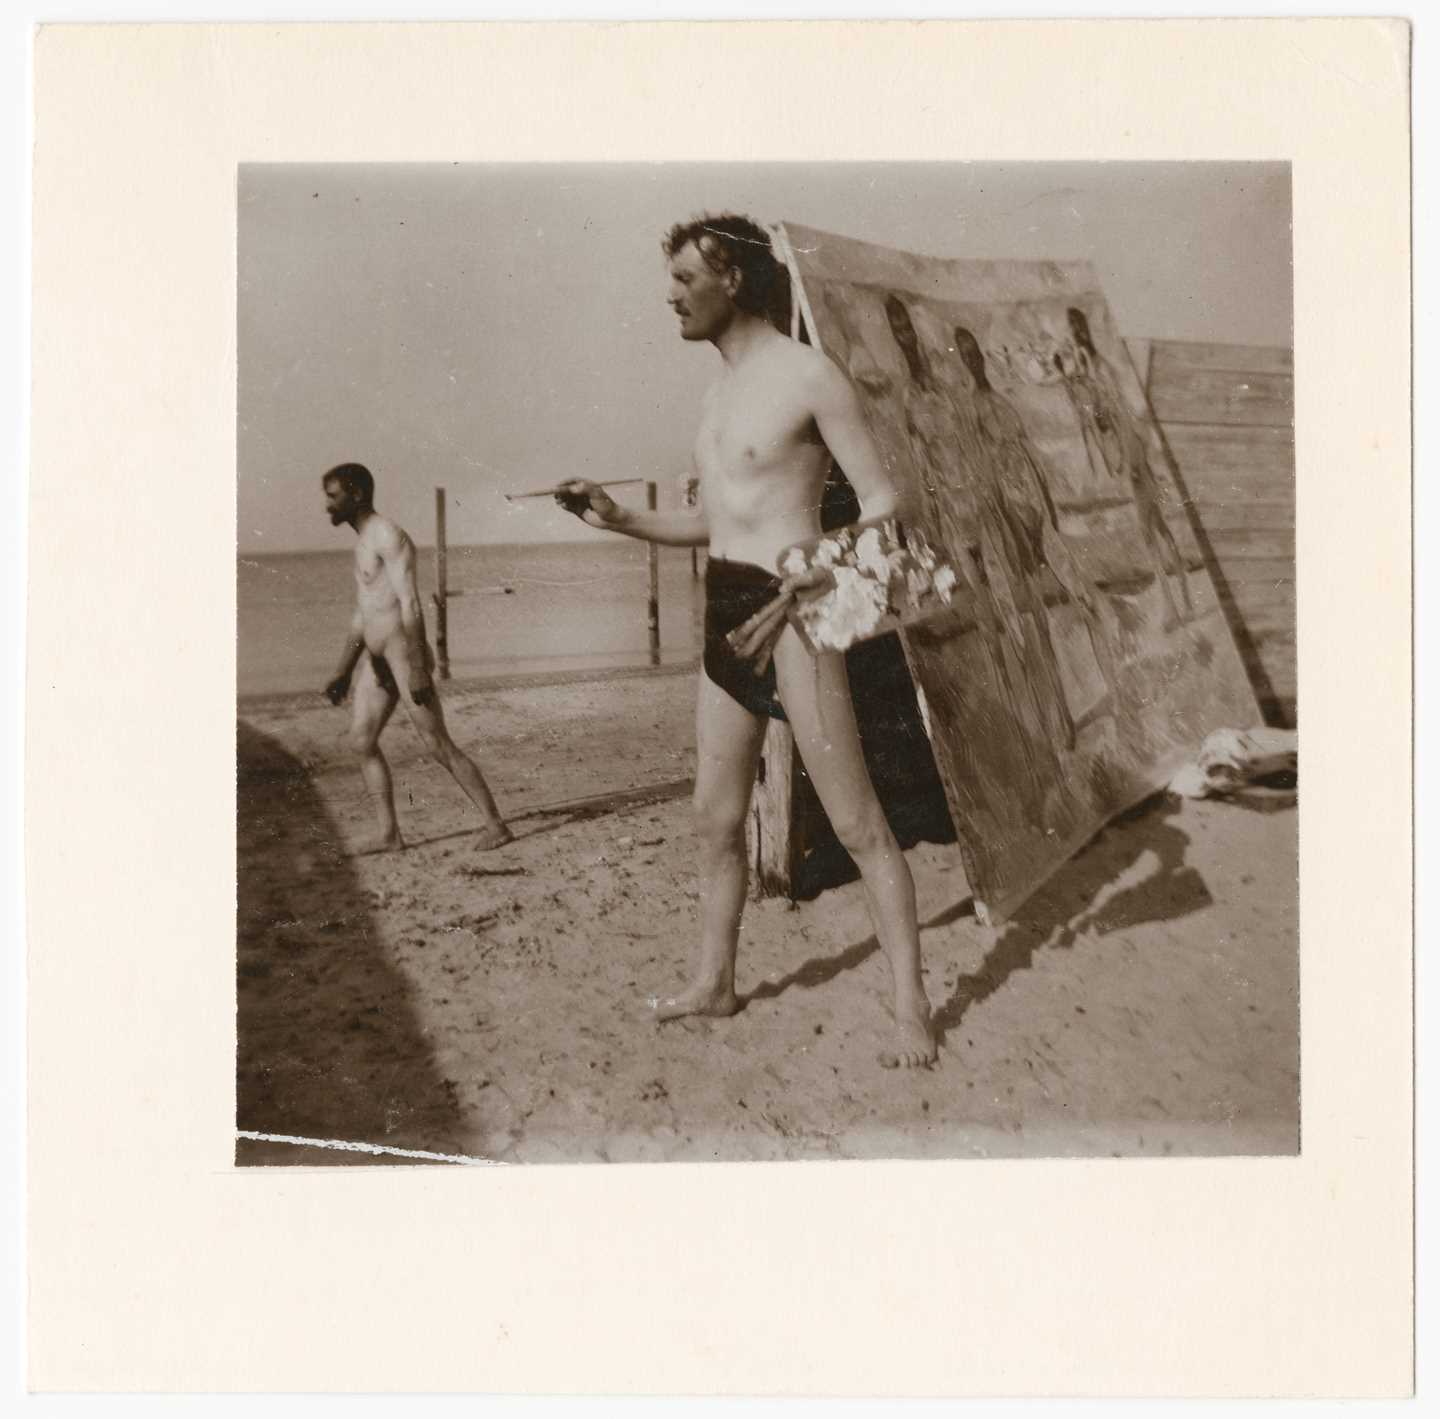 Edvard Munch: Edvard Munch on the beach with brush and palette. Collodion, 1907. Photo © Munchmuseet